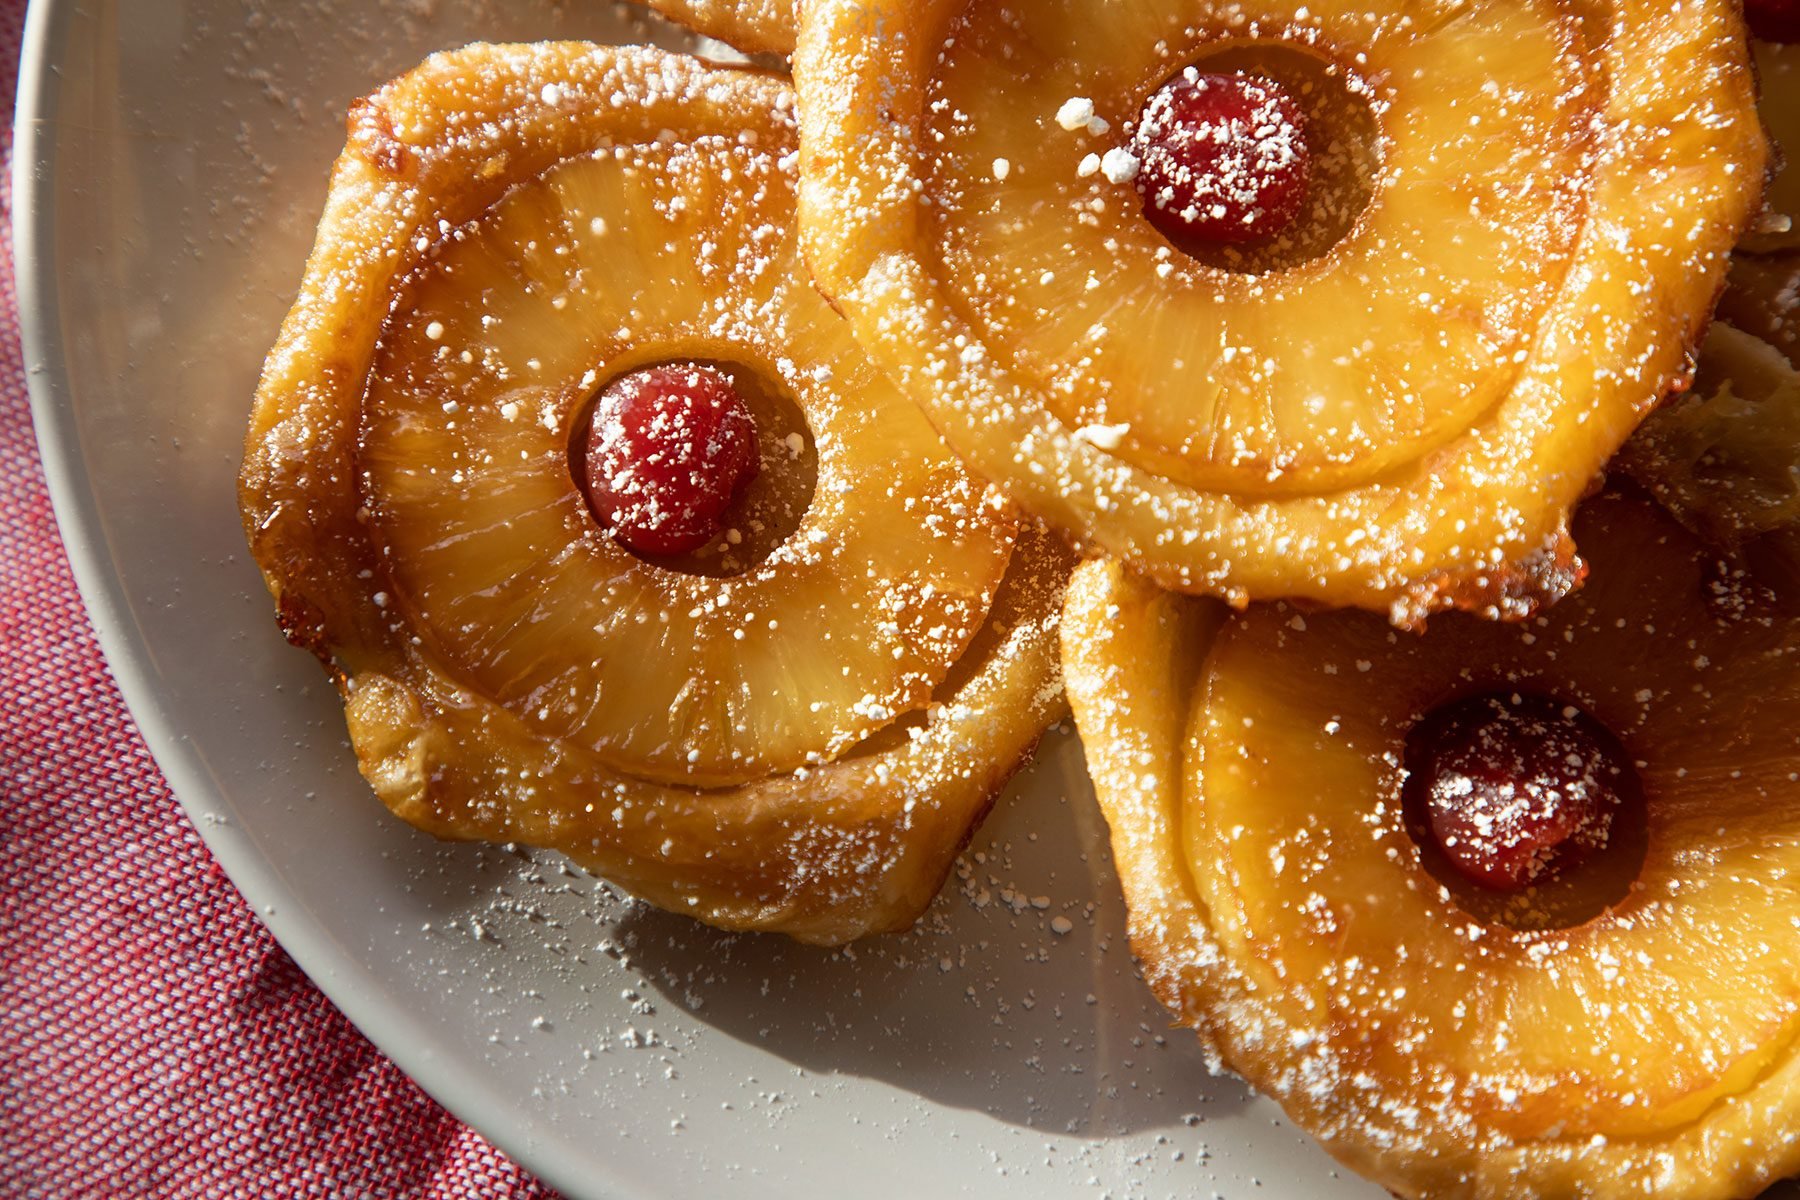 https://www.tasteofhome.com/wp-content/uploads/2023/06/Close-Up-Pineapple-Upside-Down-Pastries-Adrienne-Pen%CC%83a-for-TOH-Resize-DH-TOH.jpg